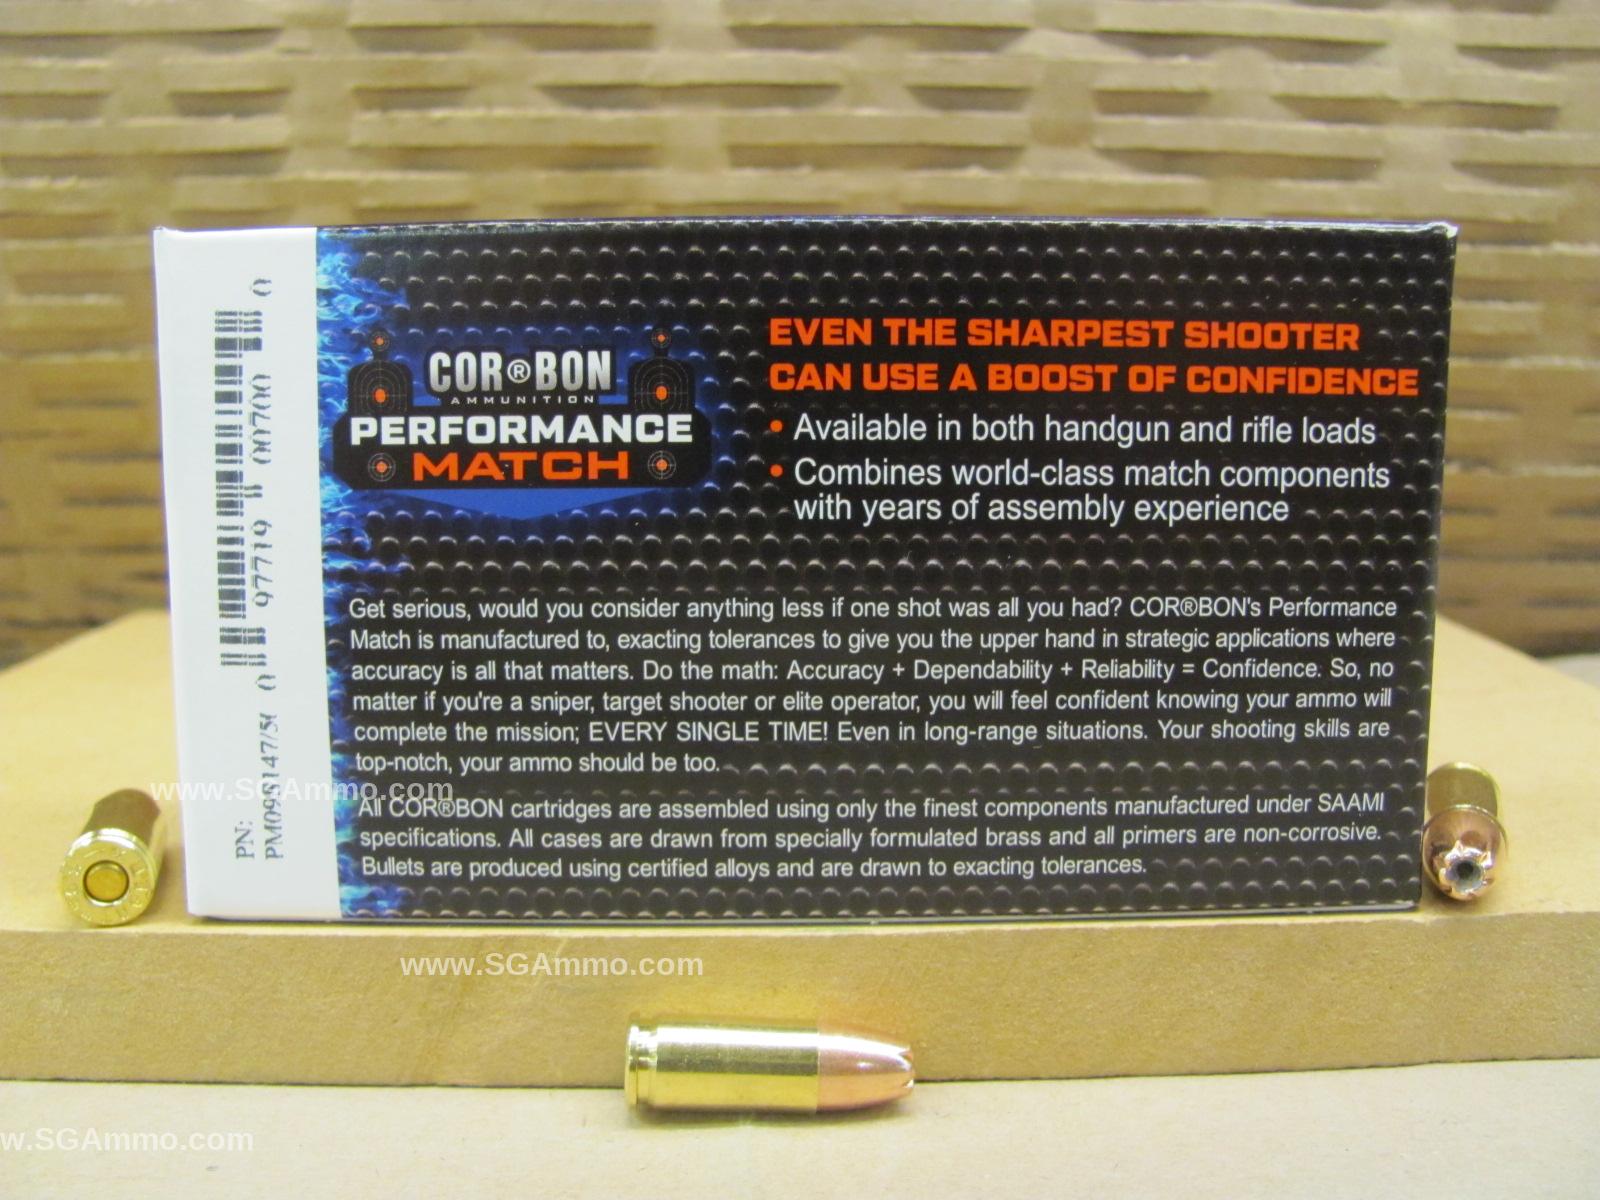 50 Round Box - 9mm Luger 147 Grain Jacketed Hollow Point Subsonic Corbon Performance Match Ammo - PM09S14750